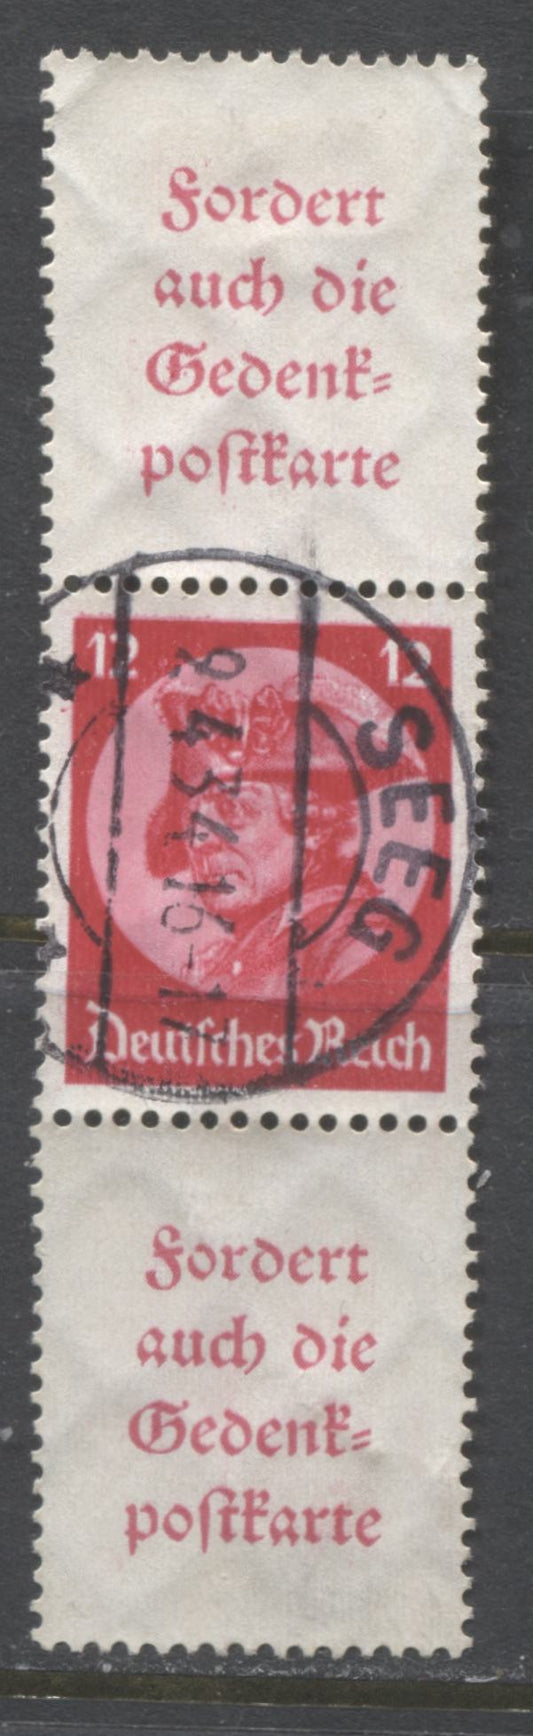 Lot 452 Germany SC#S103  1933 Potsdam Day, With April 2, 1934 Seeg CDS Cancel, A VF Used Booklet-Label Strip of 3, Click on Listing to See ALL Pictures, Estimated Value $100